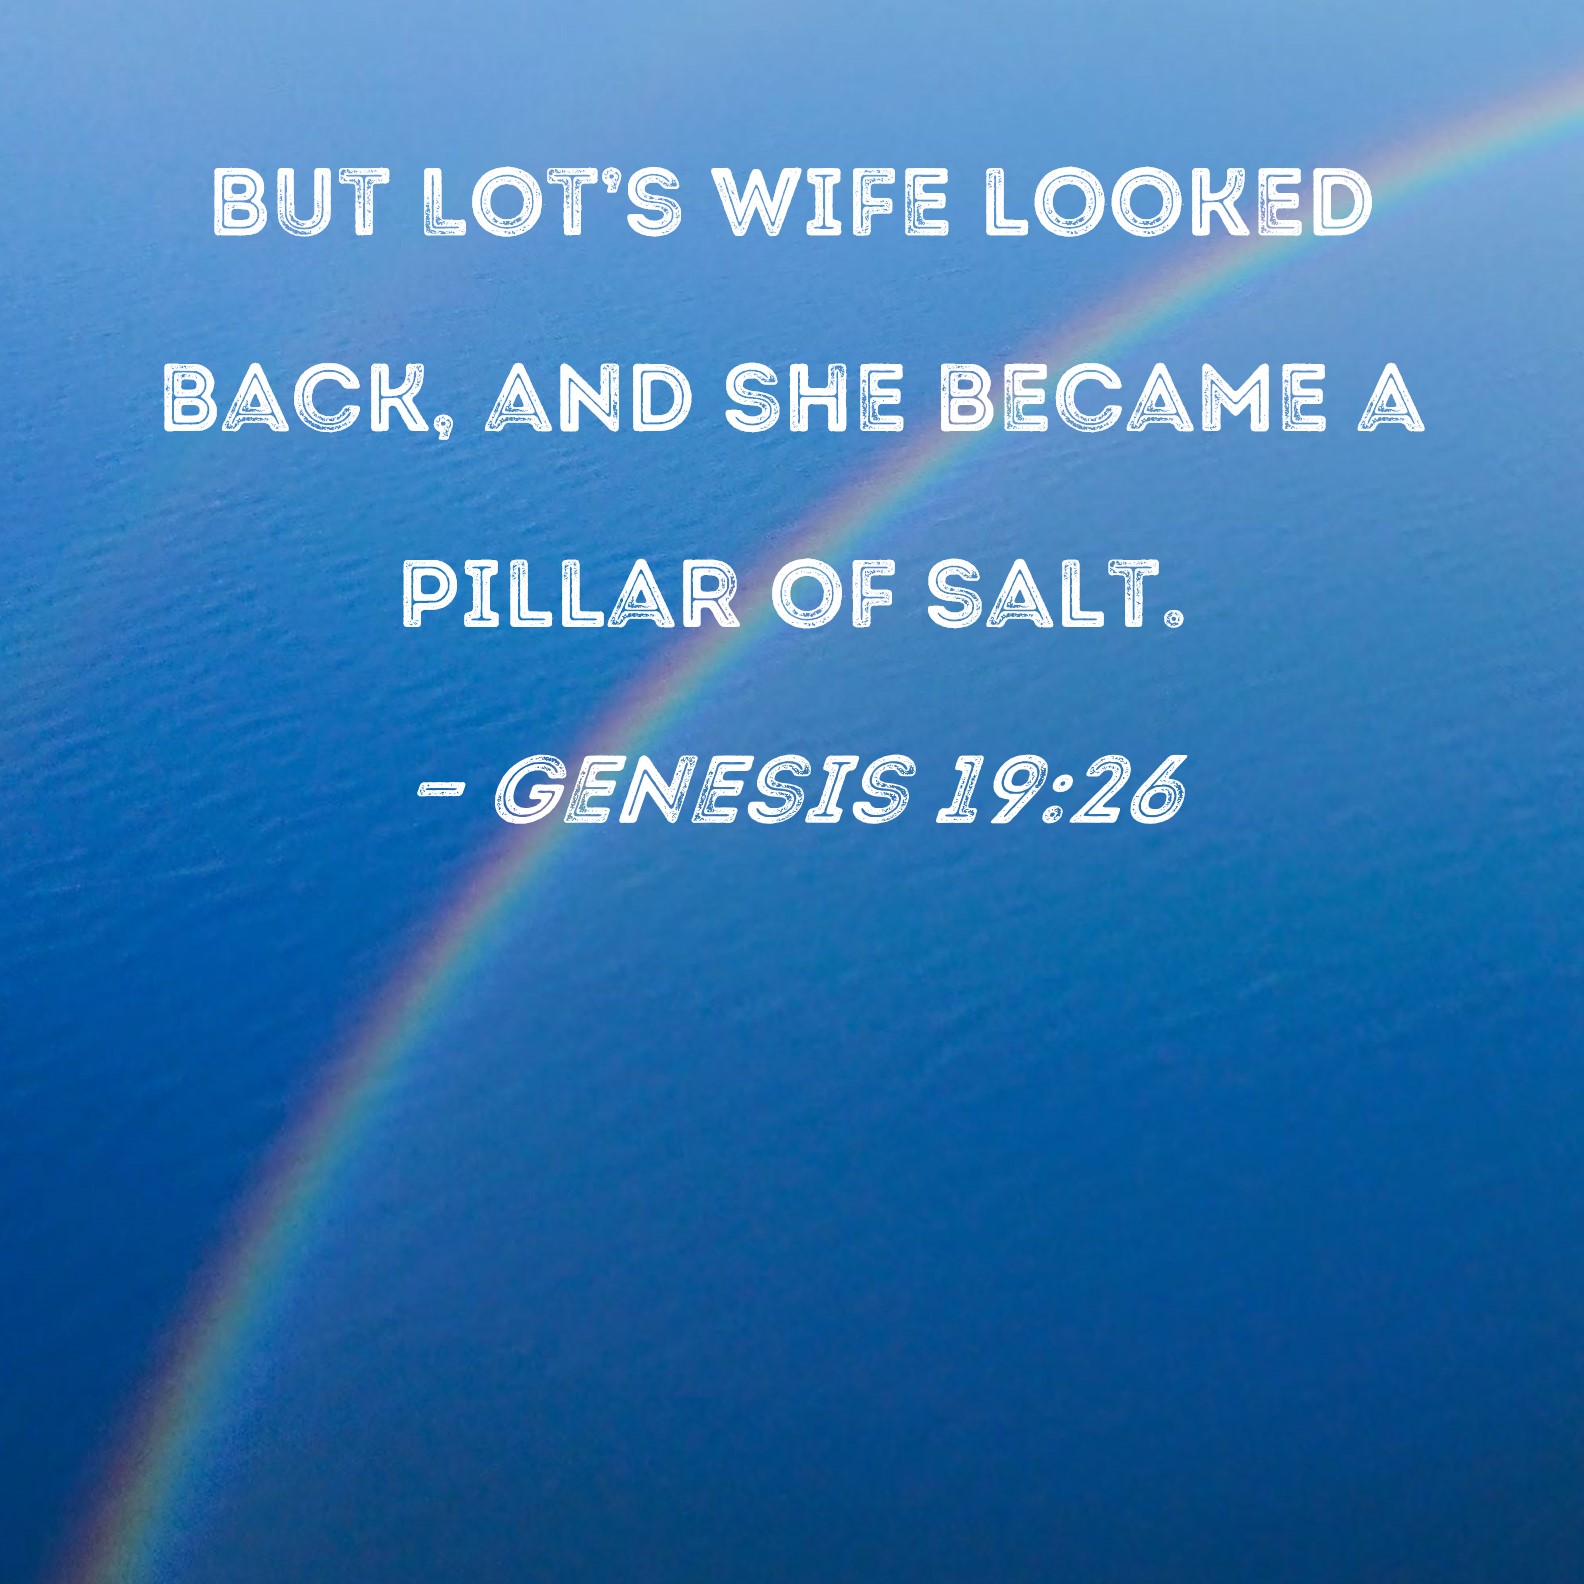 Genesis 19:26 But Lot's wife looked back, and she became a pillar of salt.